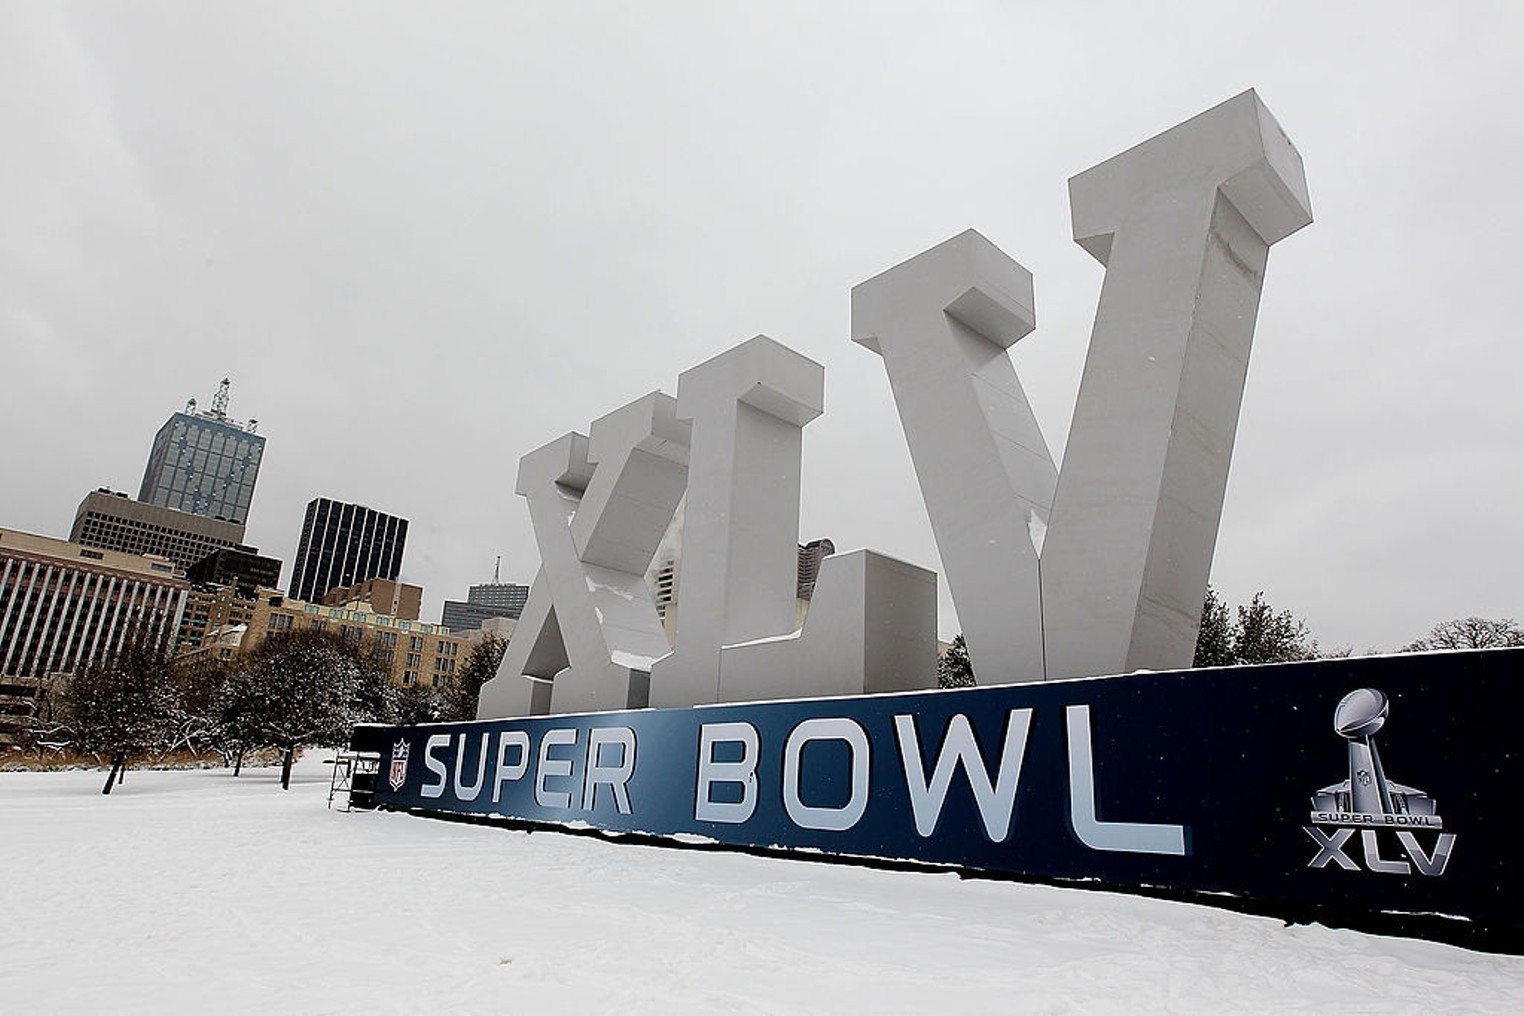 Forget Winning One — Dallas Is a Long Way From Even Hosting a Super Bowl